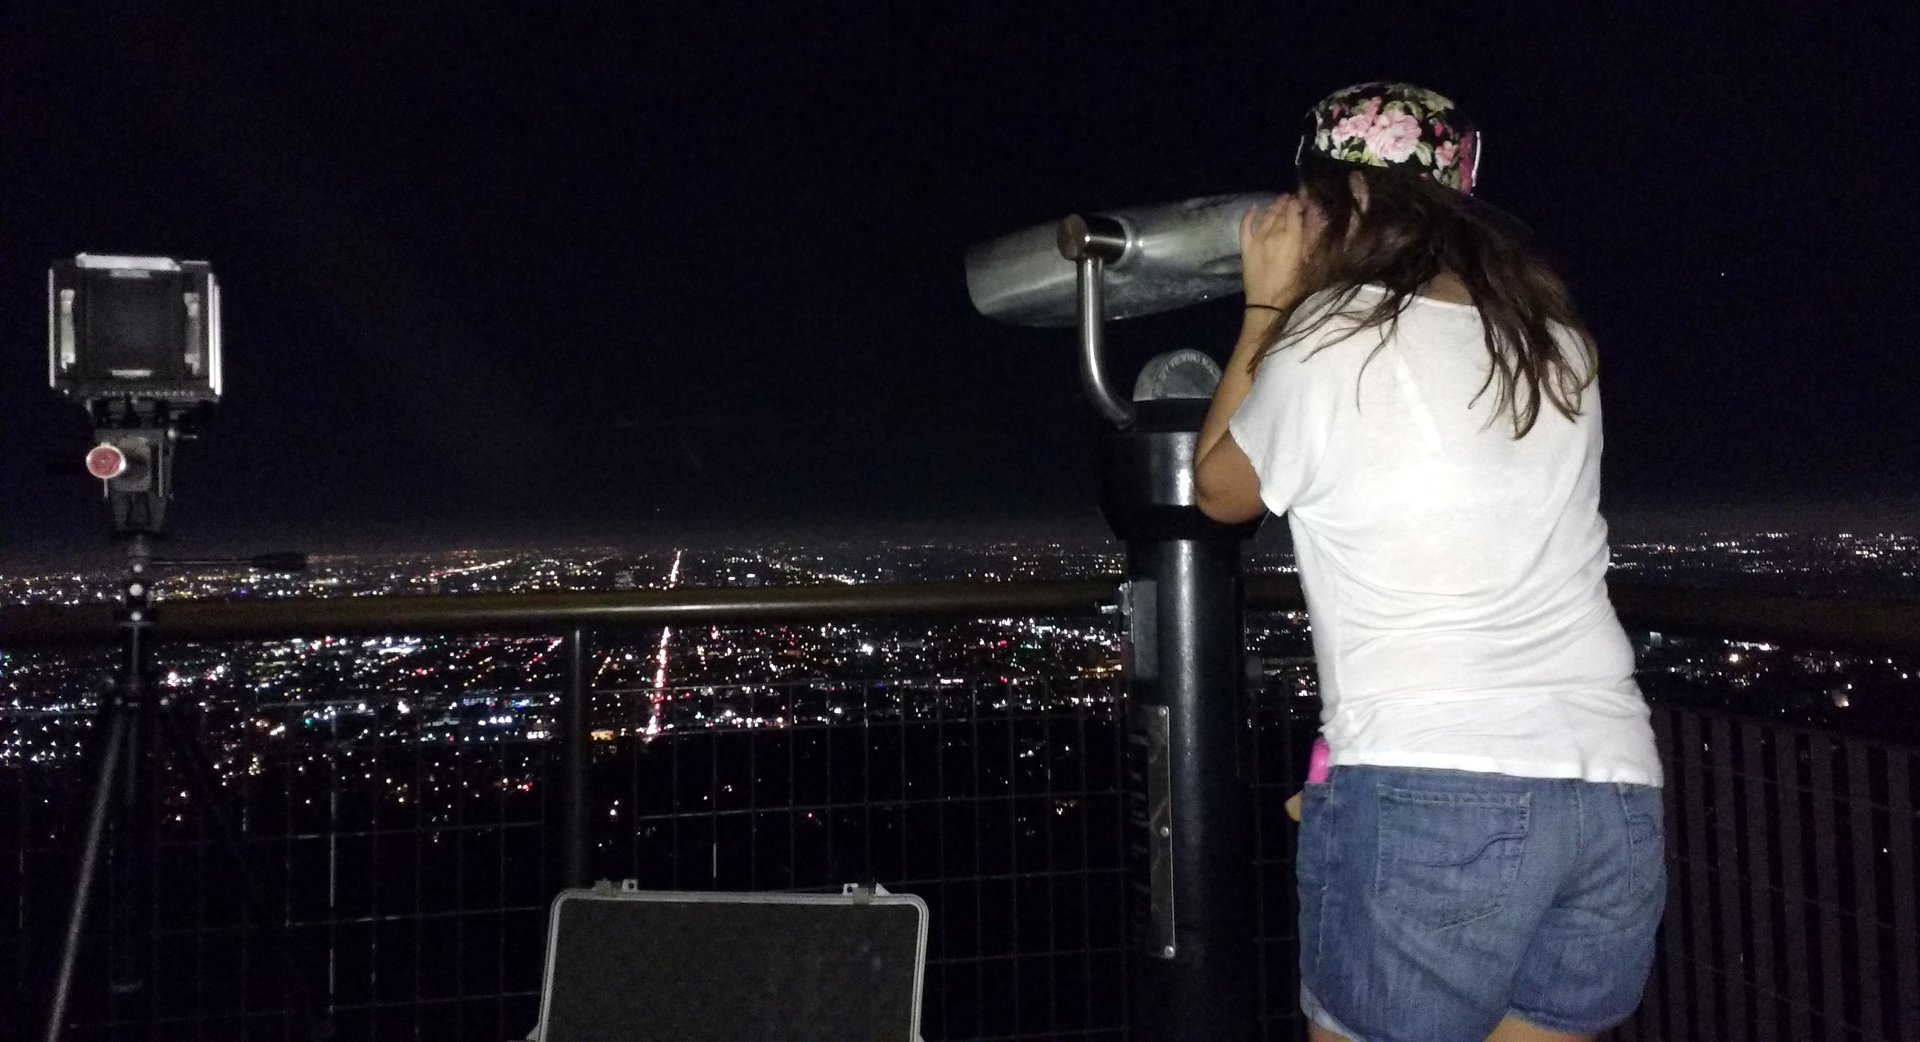 Los Angeles' skyline photo from Griffith Observatory at night